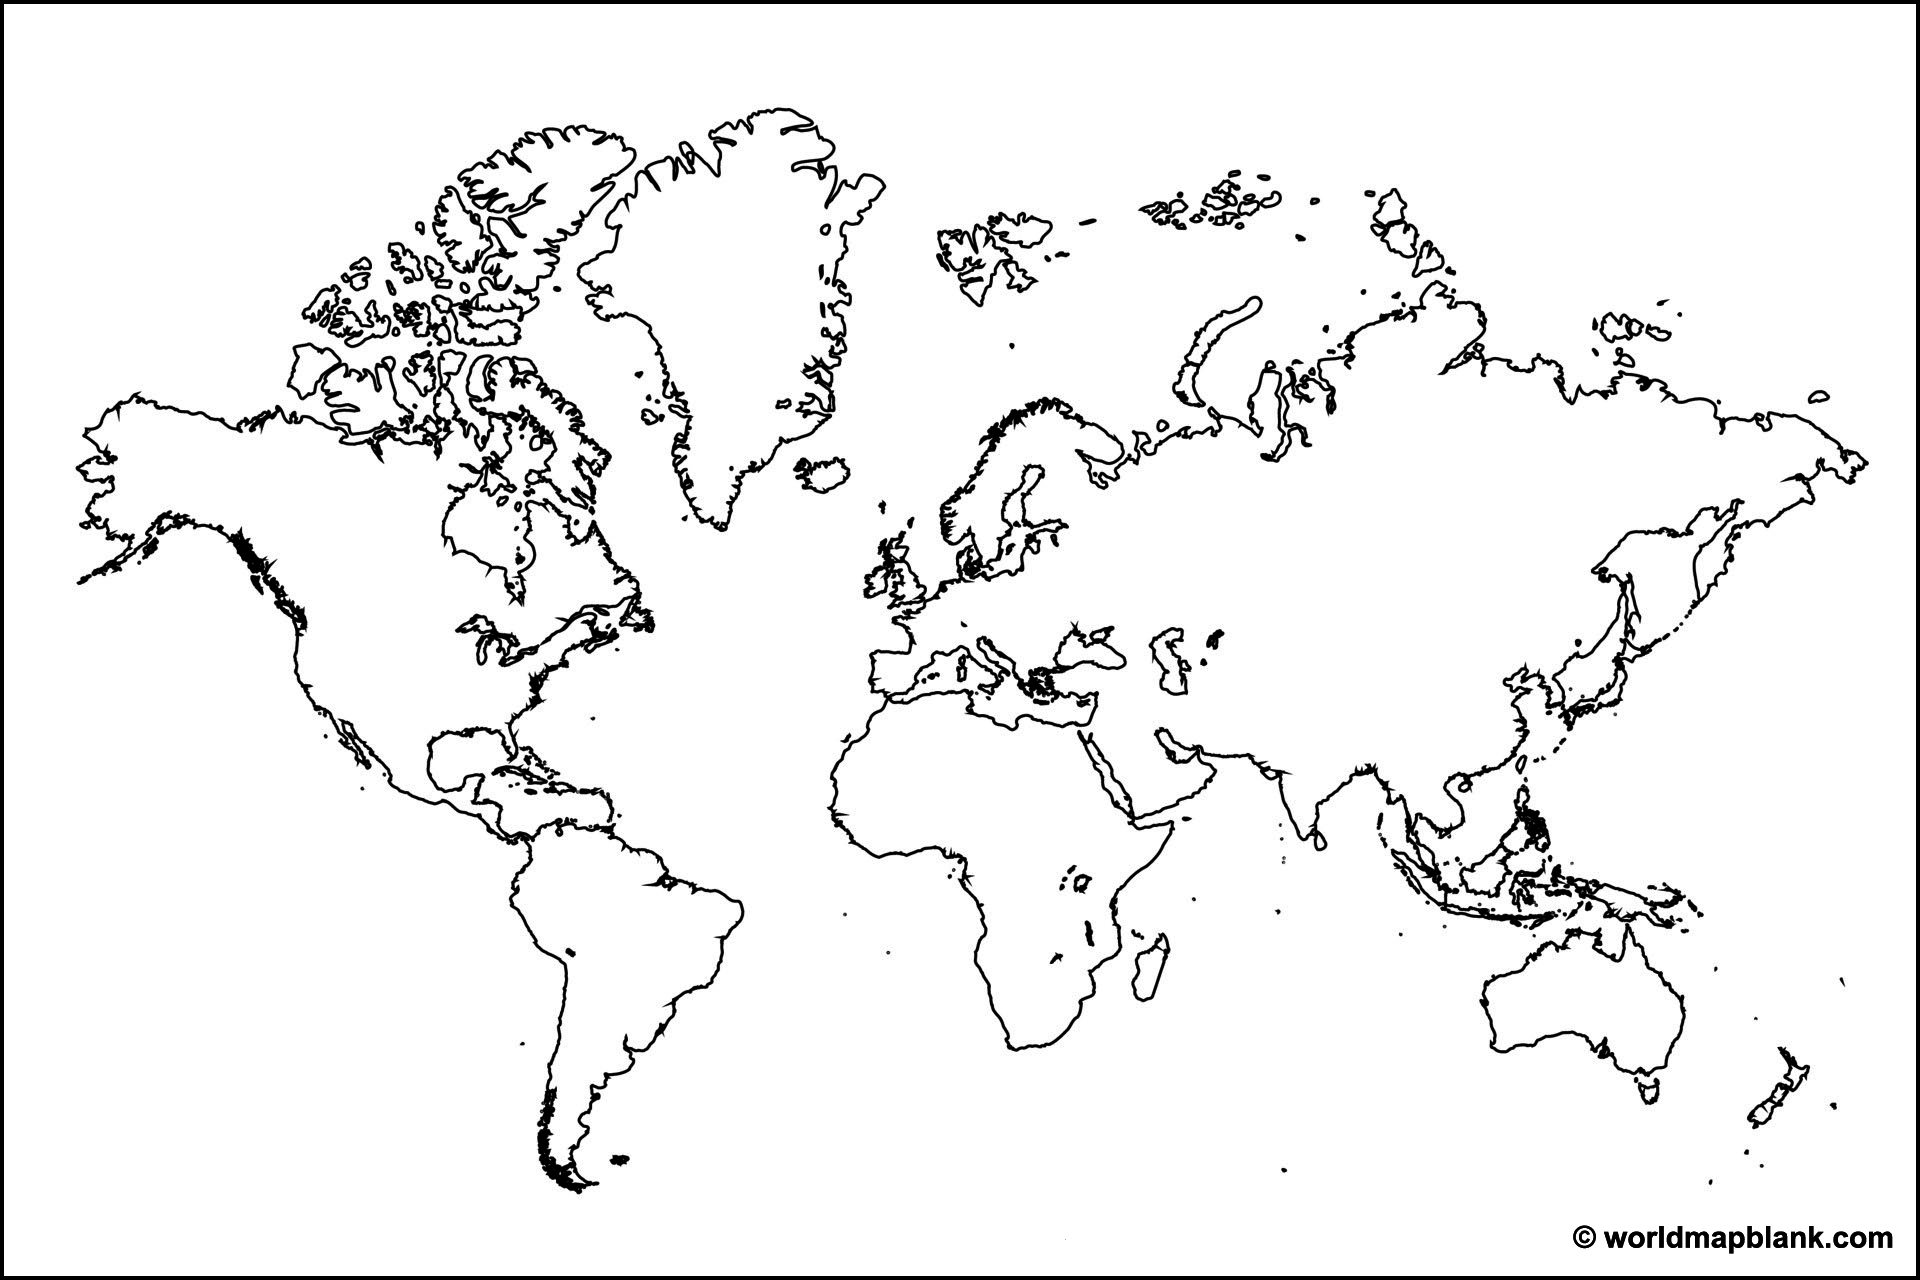 Blank outline map of the world